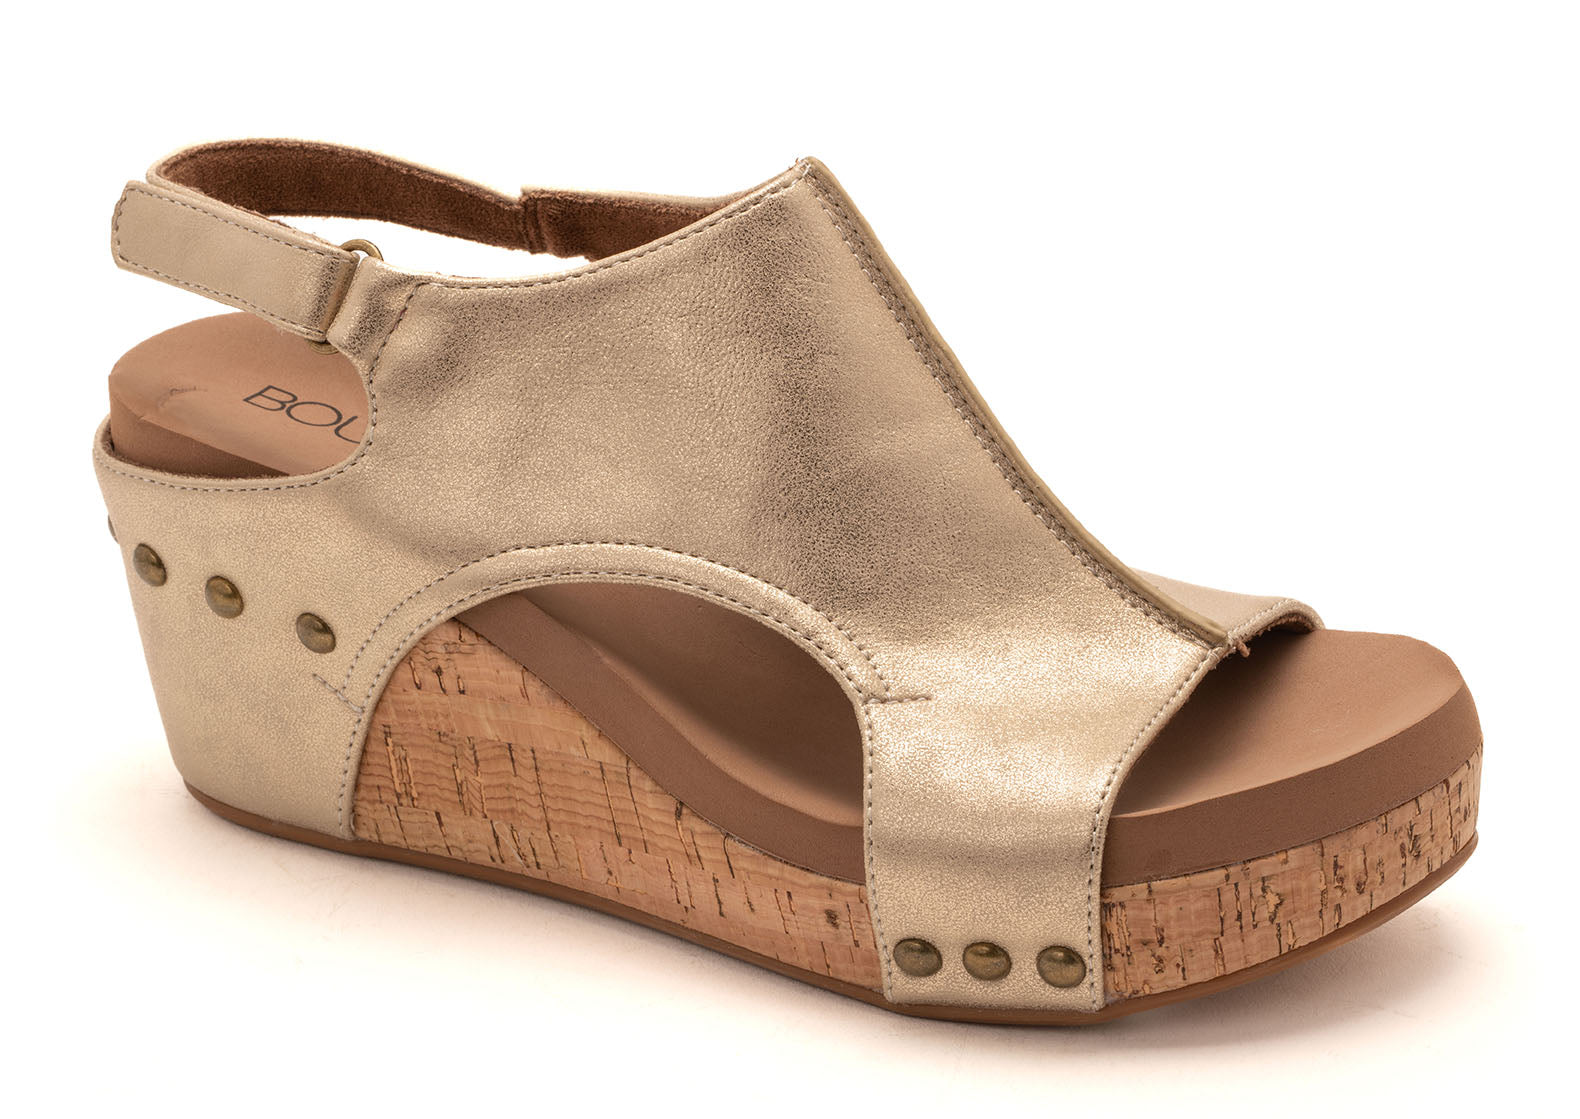 Market Live Preorder: Carley Wedge by Corky’s (Ships in 2-3 Weeks)